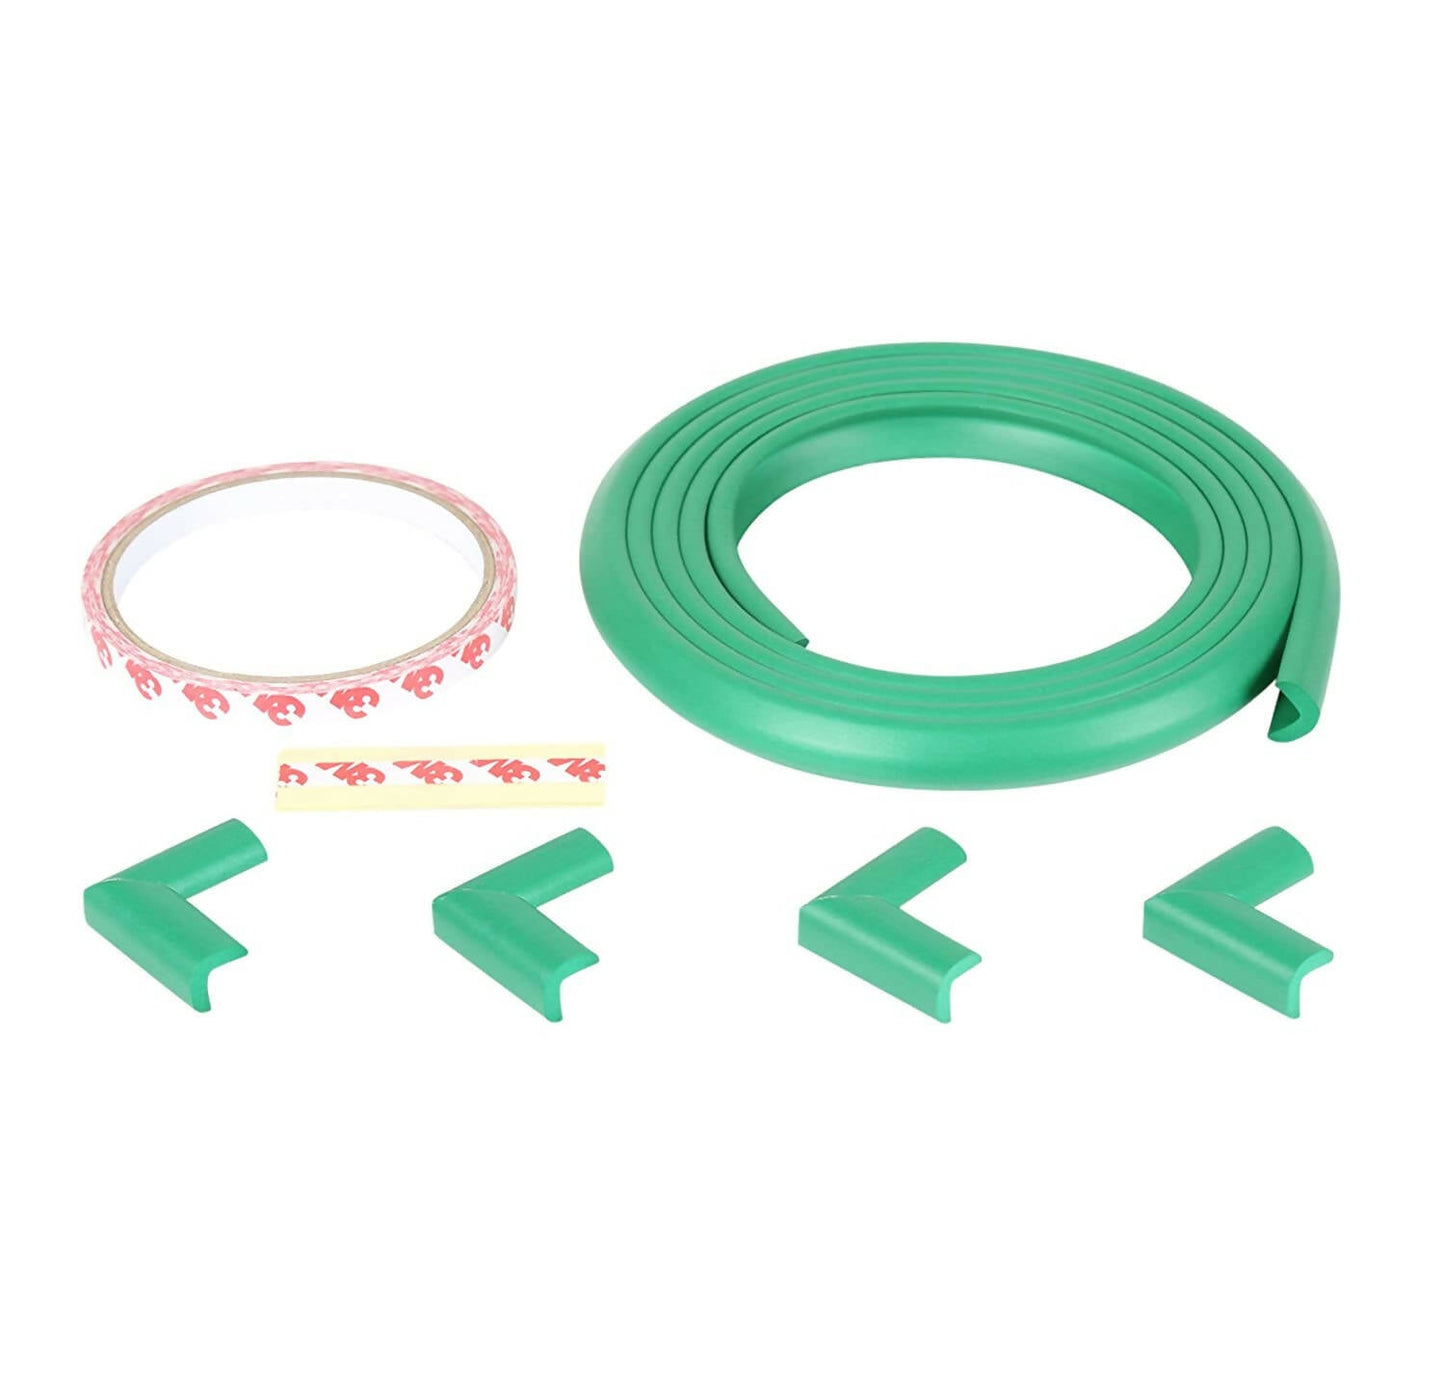 Safe-O-Kid Unique High Density L-Shaped 2 Mtr Long Mini 2 Edge Guards With 8 Corner Cushions - Green